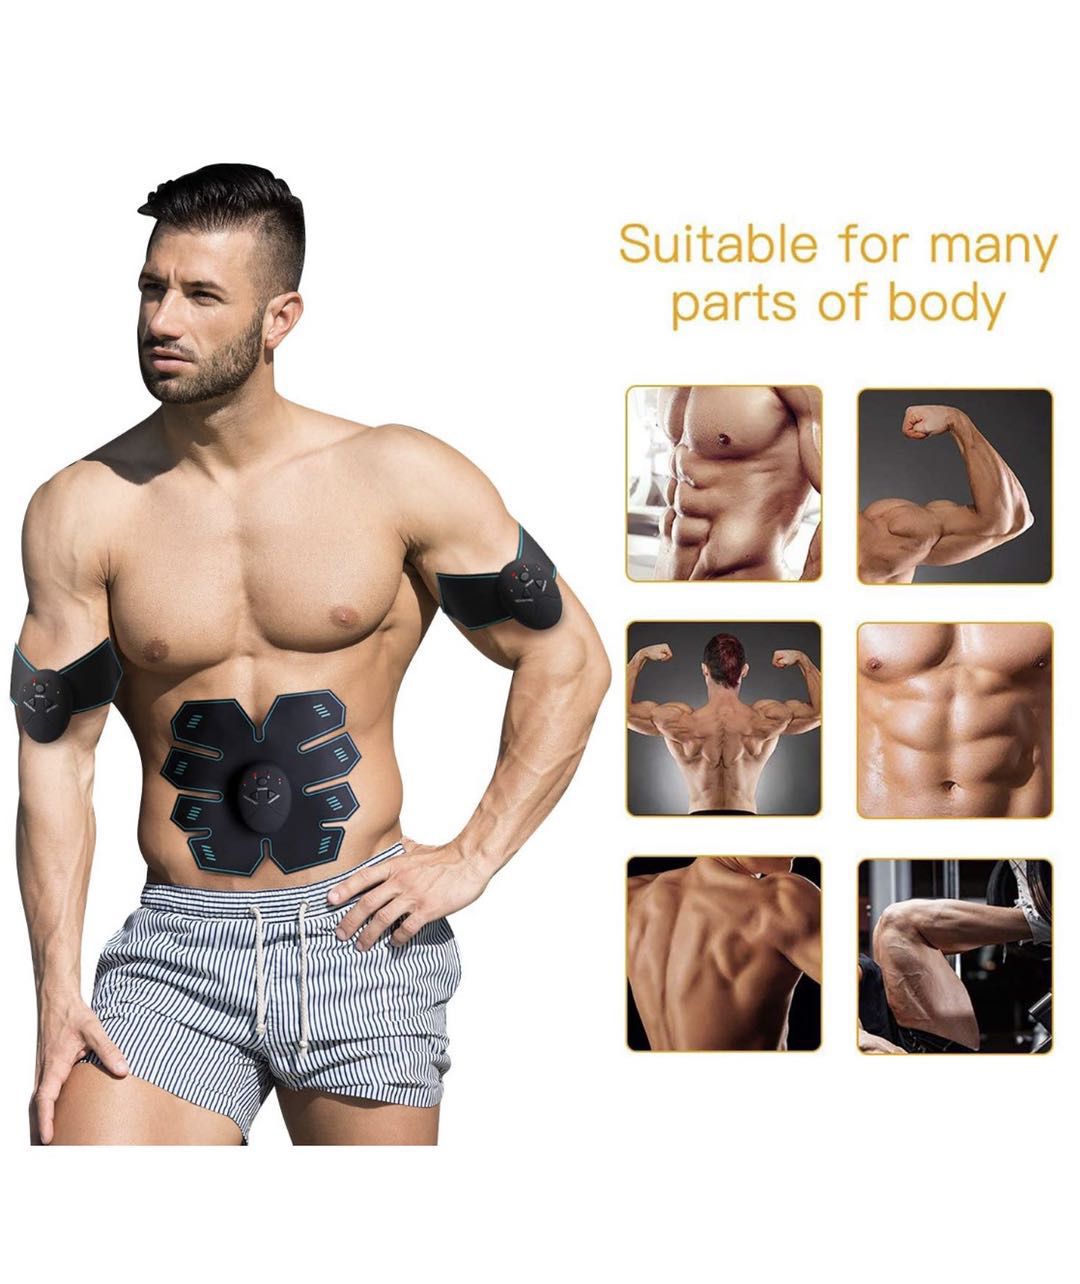 Abs Stimulator, Muscle Toner - Abs Stimulating Belt- Abdominal Toner- Training Device for Muscles- Wireless Portable to-Go Gym Device- Muscle Sculpti